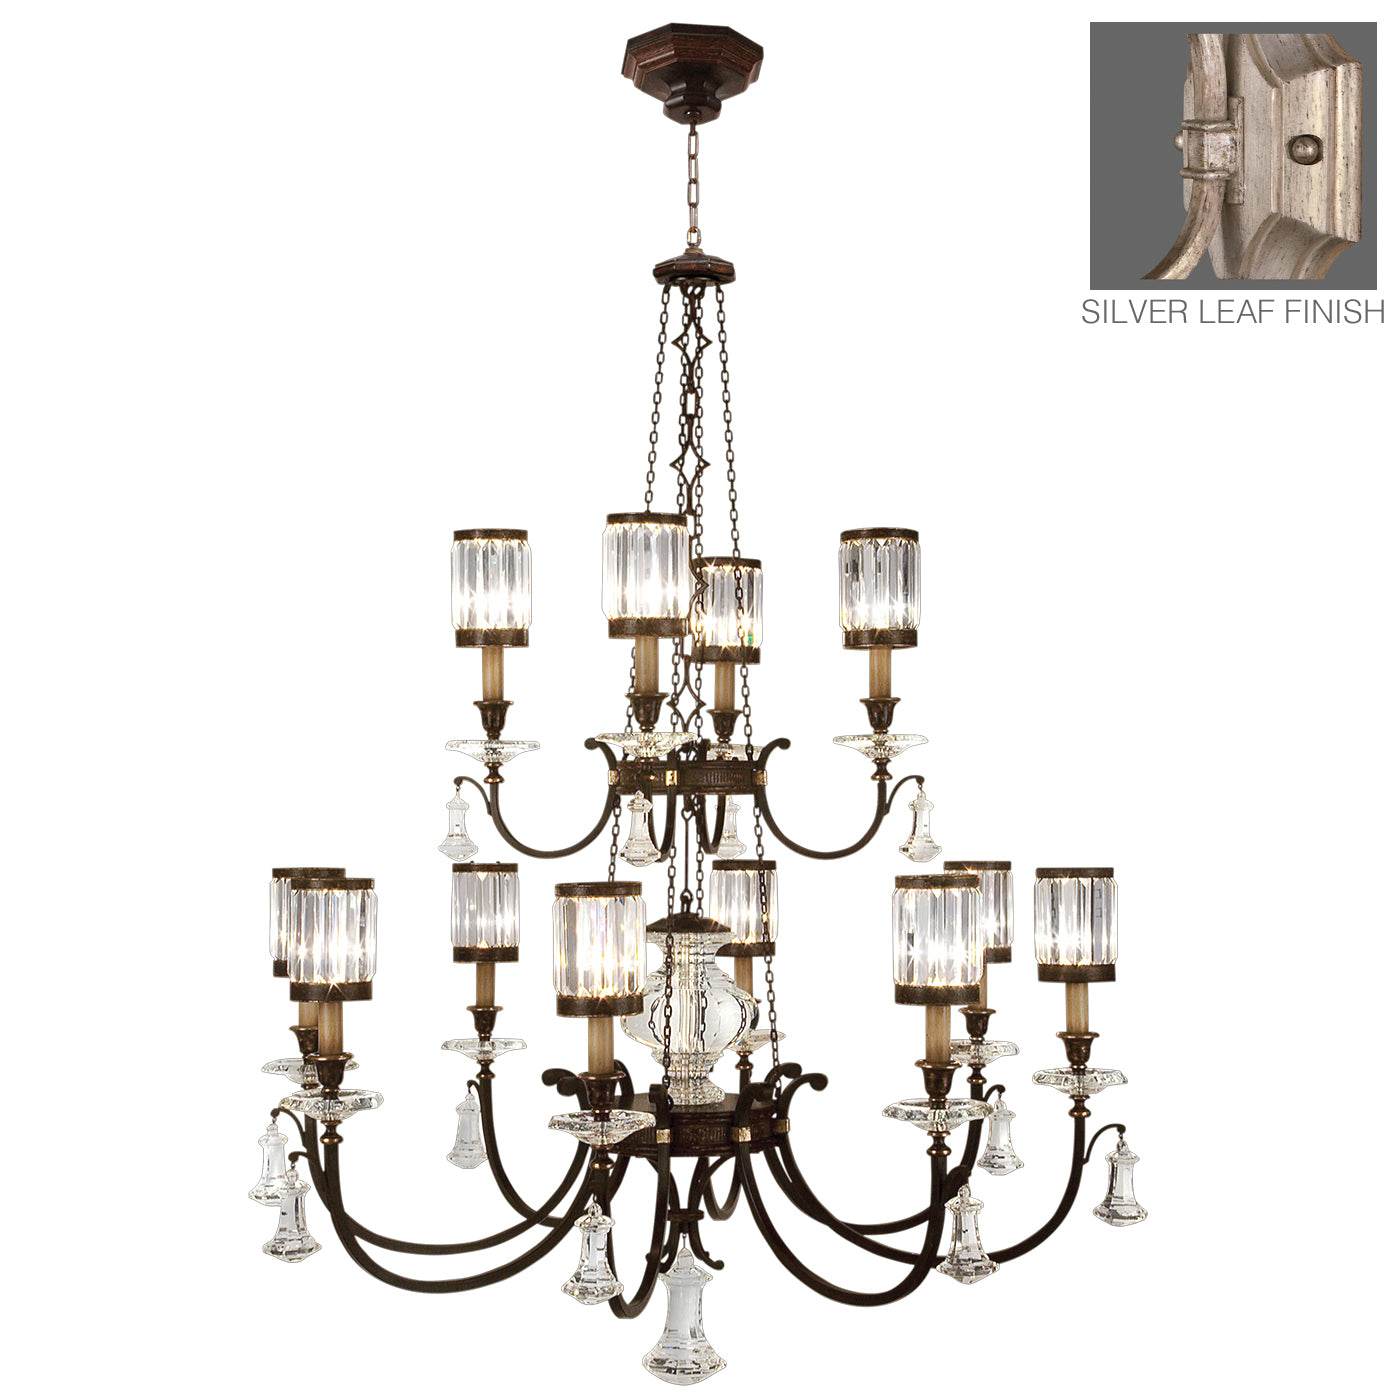 Fine Art Handcrafted Lighting Eaton Place Chandelier Chandeliers Fine Art Handcrafted Lighting Silver 53 x 69 